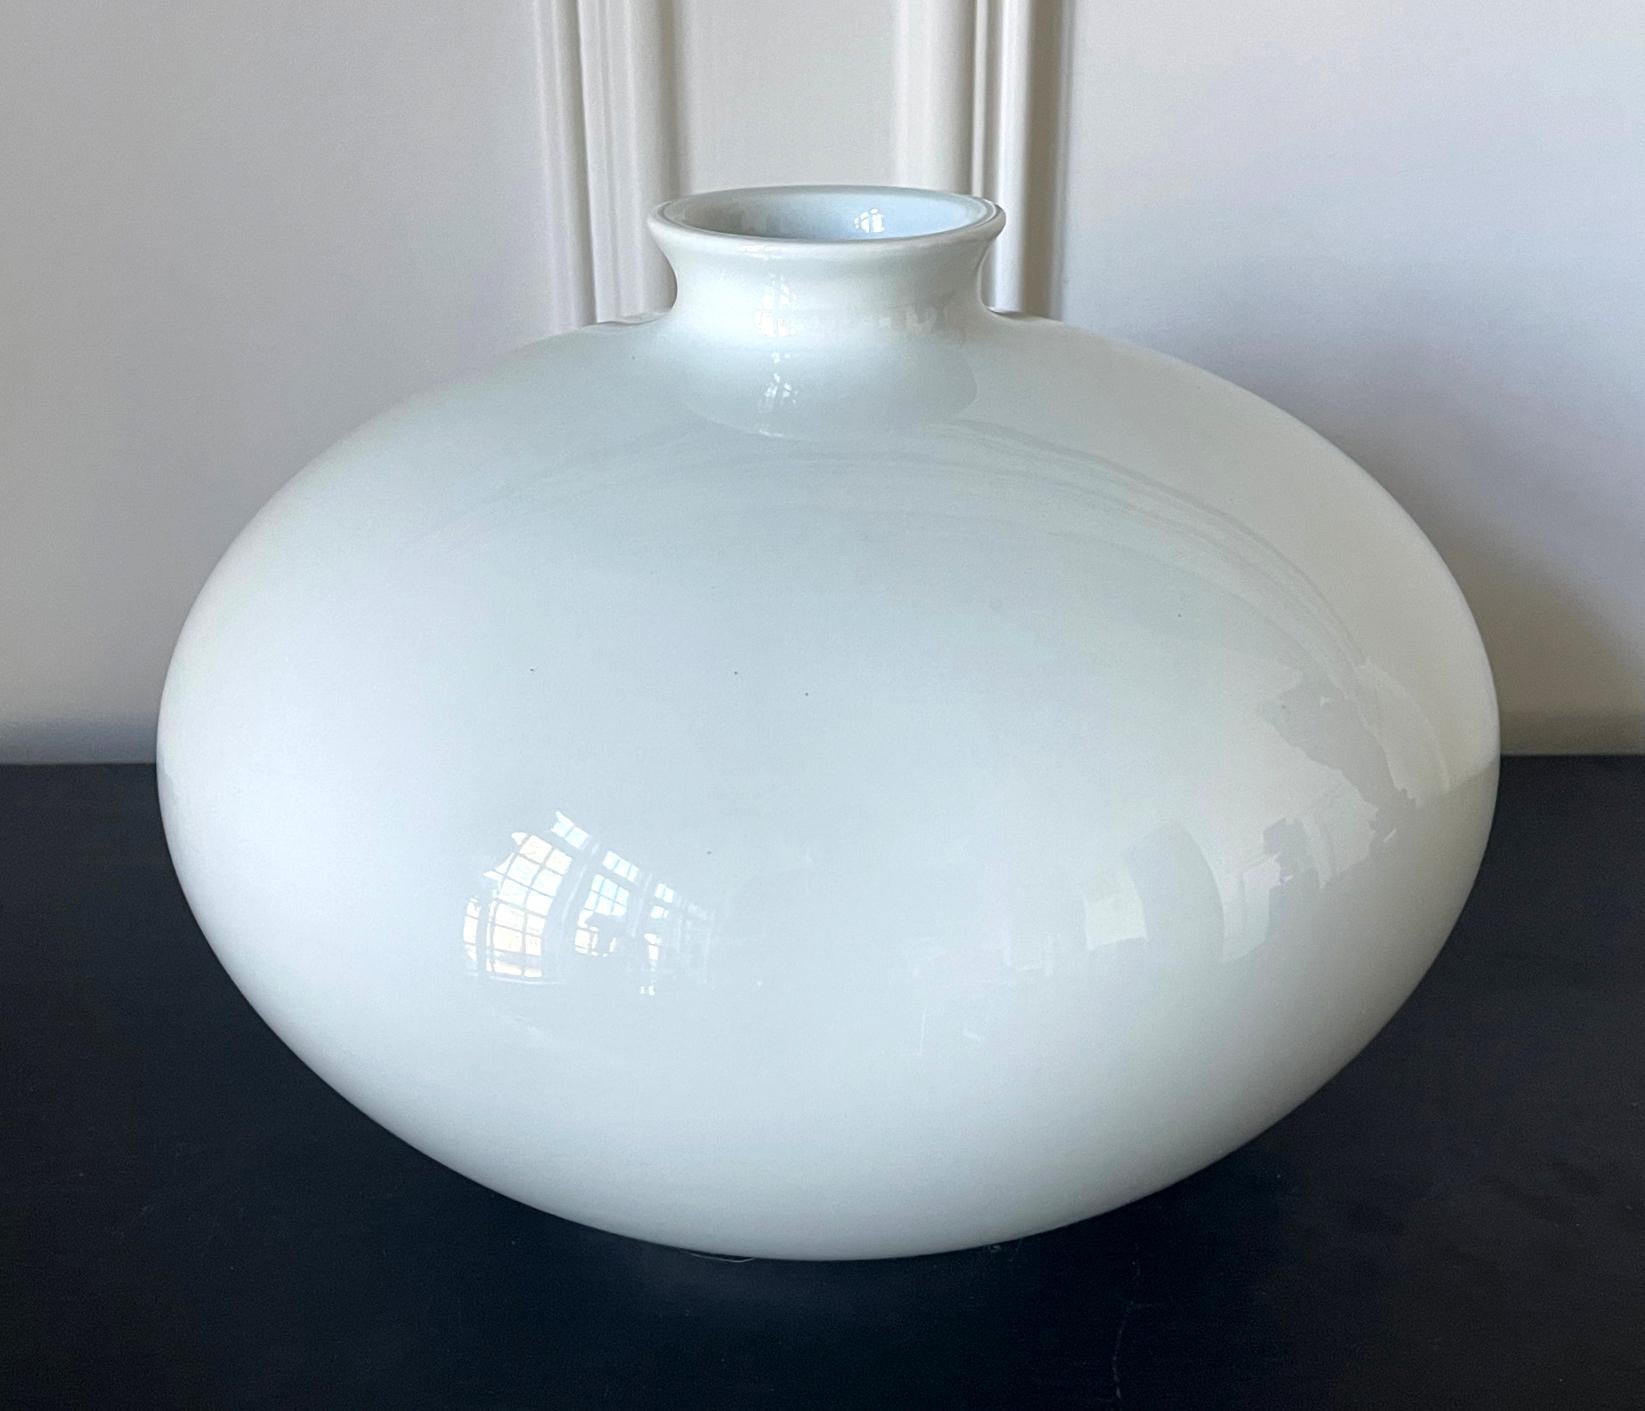 A large glazed white porcelain vase in the jar-form by Japanese ceramic artist Inoue Manji (Japanese, b. 1929). Minimalistic in form, the vase is pure white with a very subtle blue hue and of a perfect nearly sphere form. It has a small mouth